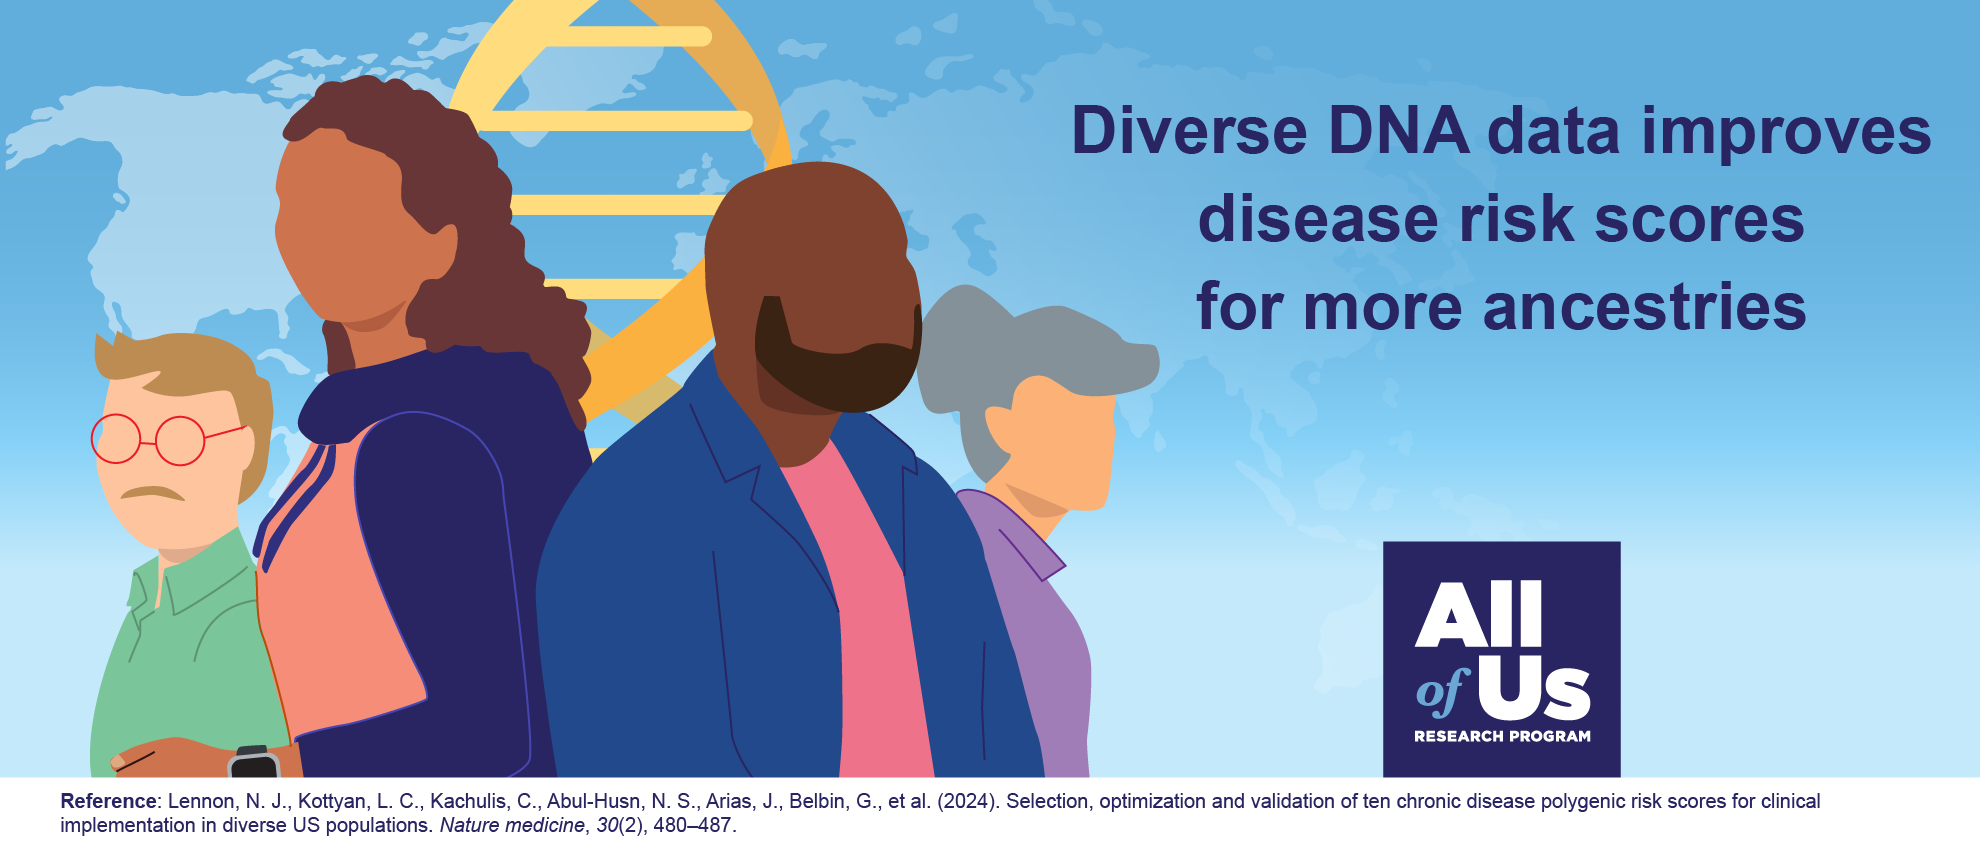 Cartoon of 4 people of different race, ethnicity, age, gender, and ability, in front of a DNA double helix. A map of the world is displayed in the background. The logo of the All of Us Research Program is below a text that says “Diverse DNA data improves disease risk scores for more ancestries.” Reference: Lennon, Kottyan, Kachulis, et al. (2024). Selection, optimization and validation of ten chronic disease polygenic risk scores for clinical implementation in diverse US populations. Nature medicine. 